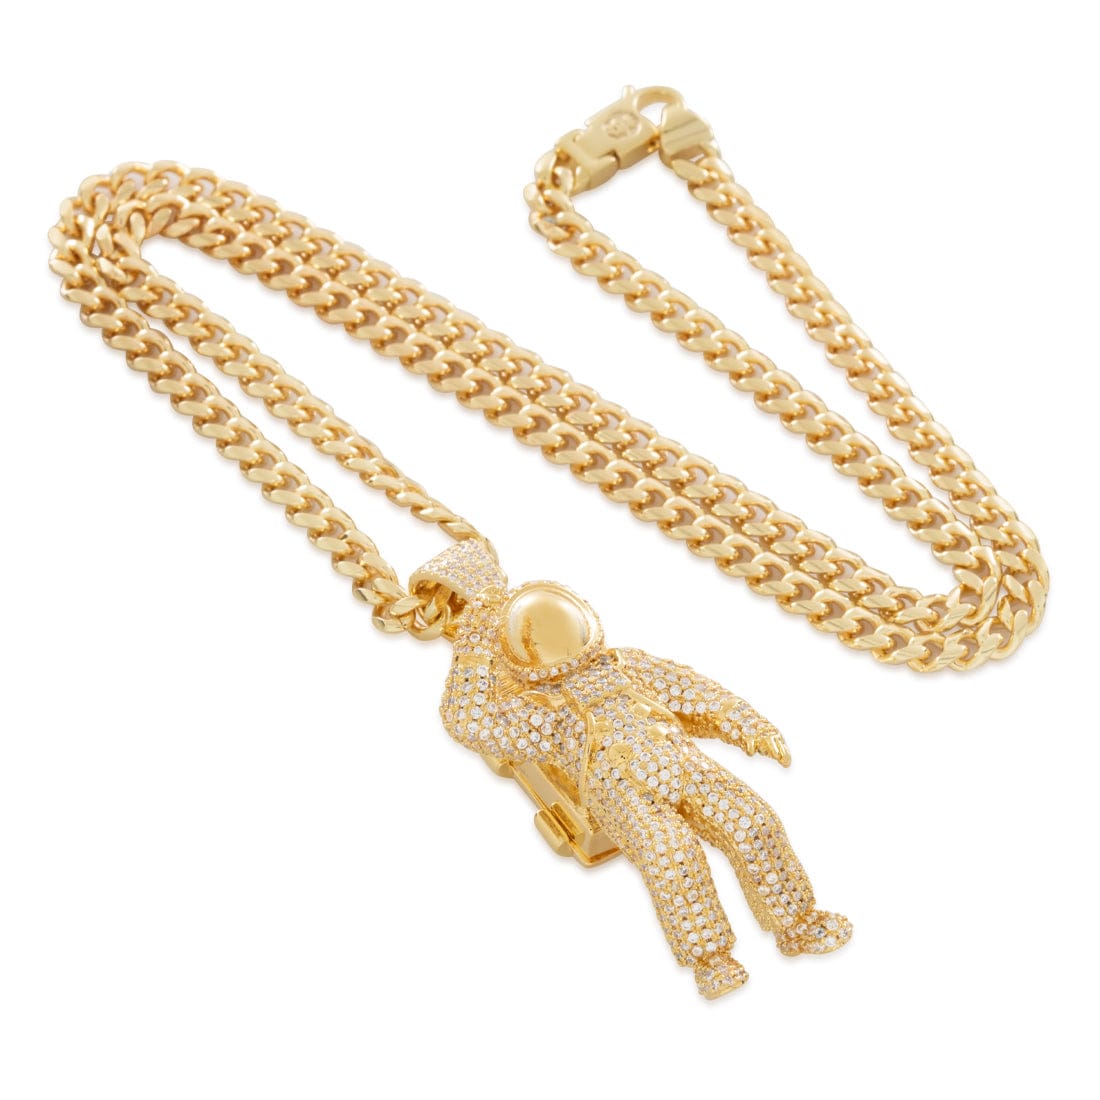 New Releases | Hip Hop Jewelry & Streetwear | King Ice